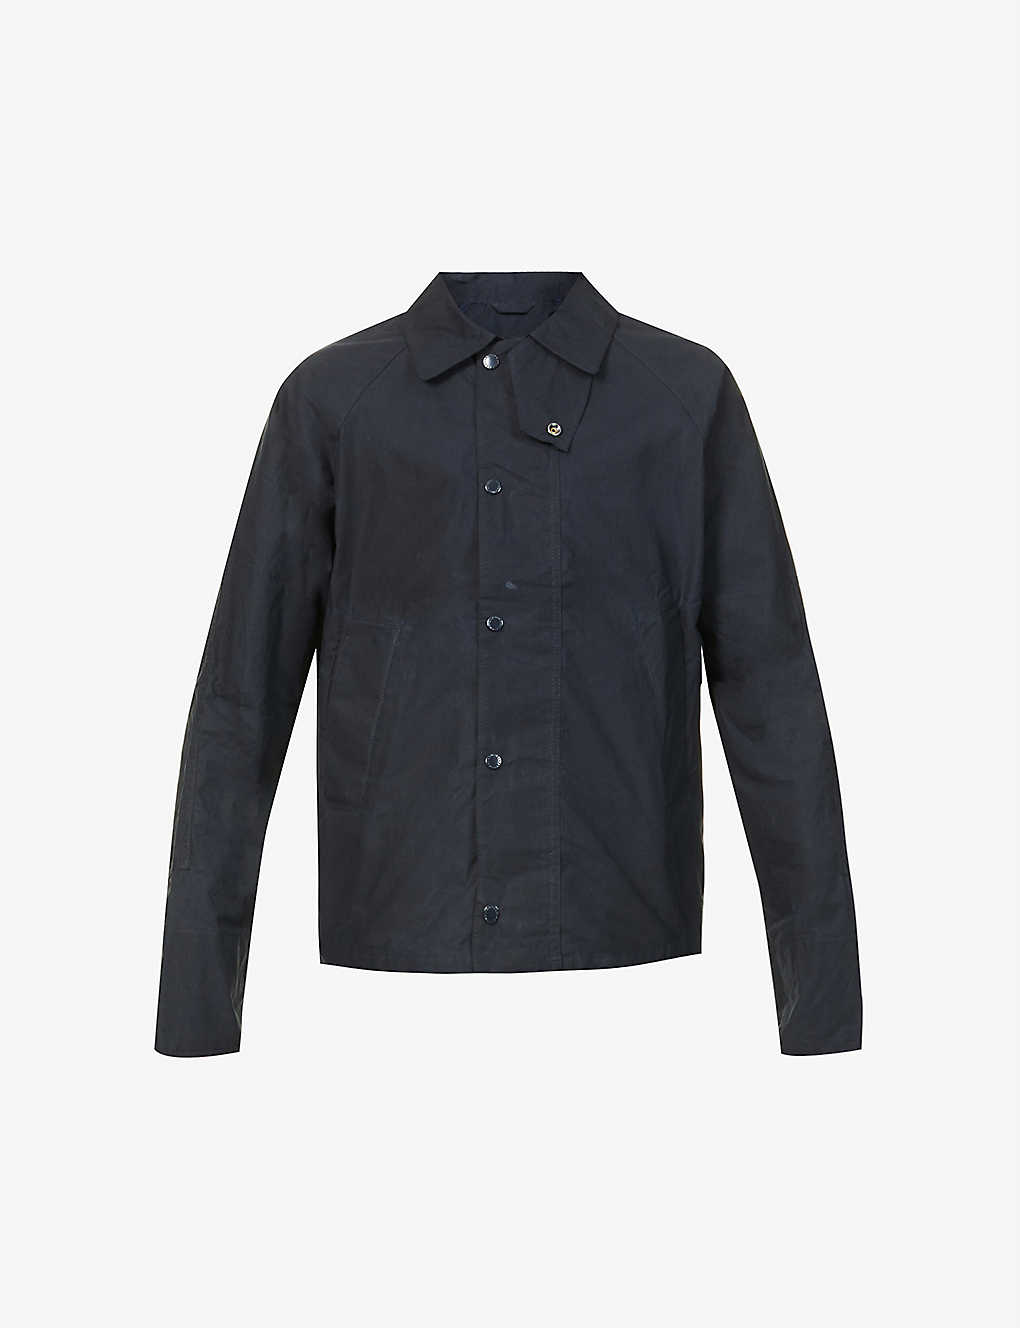 The Barbour x Engineered Garments James Bond Covert collared cotton jacket(9426413)